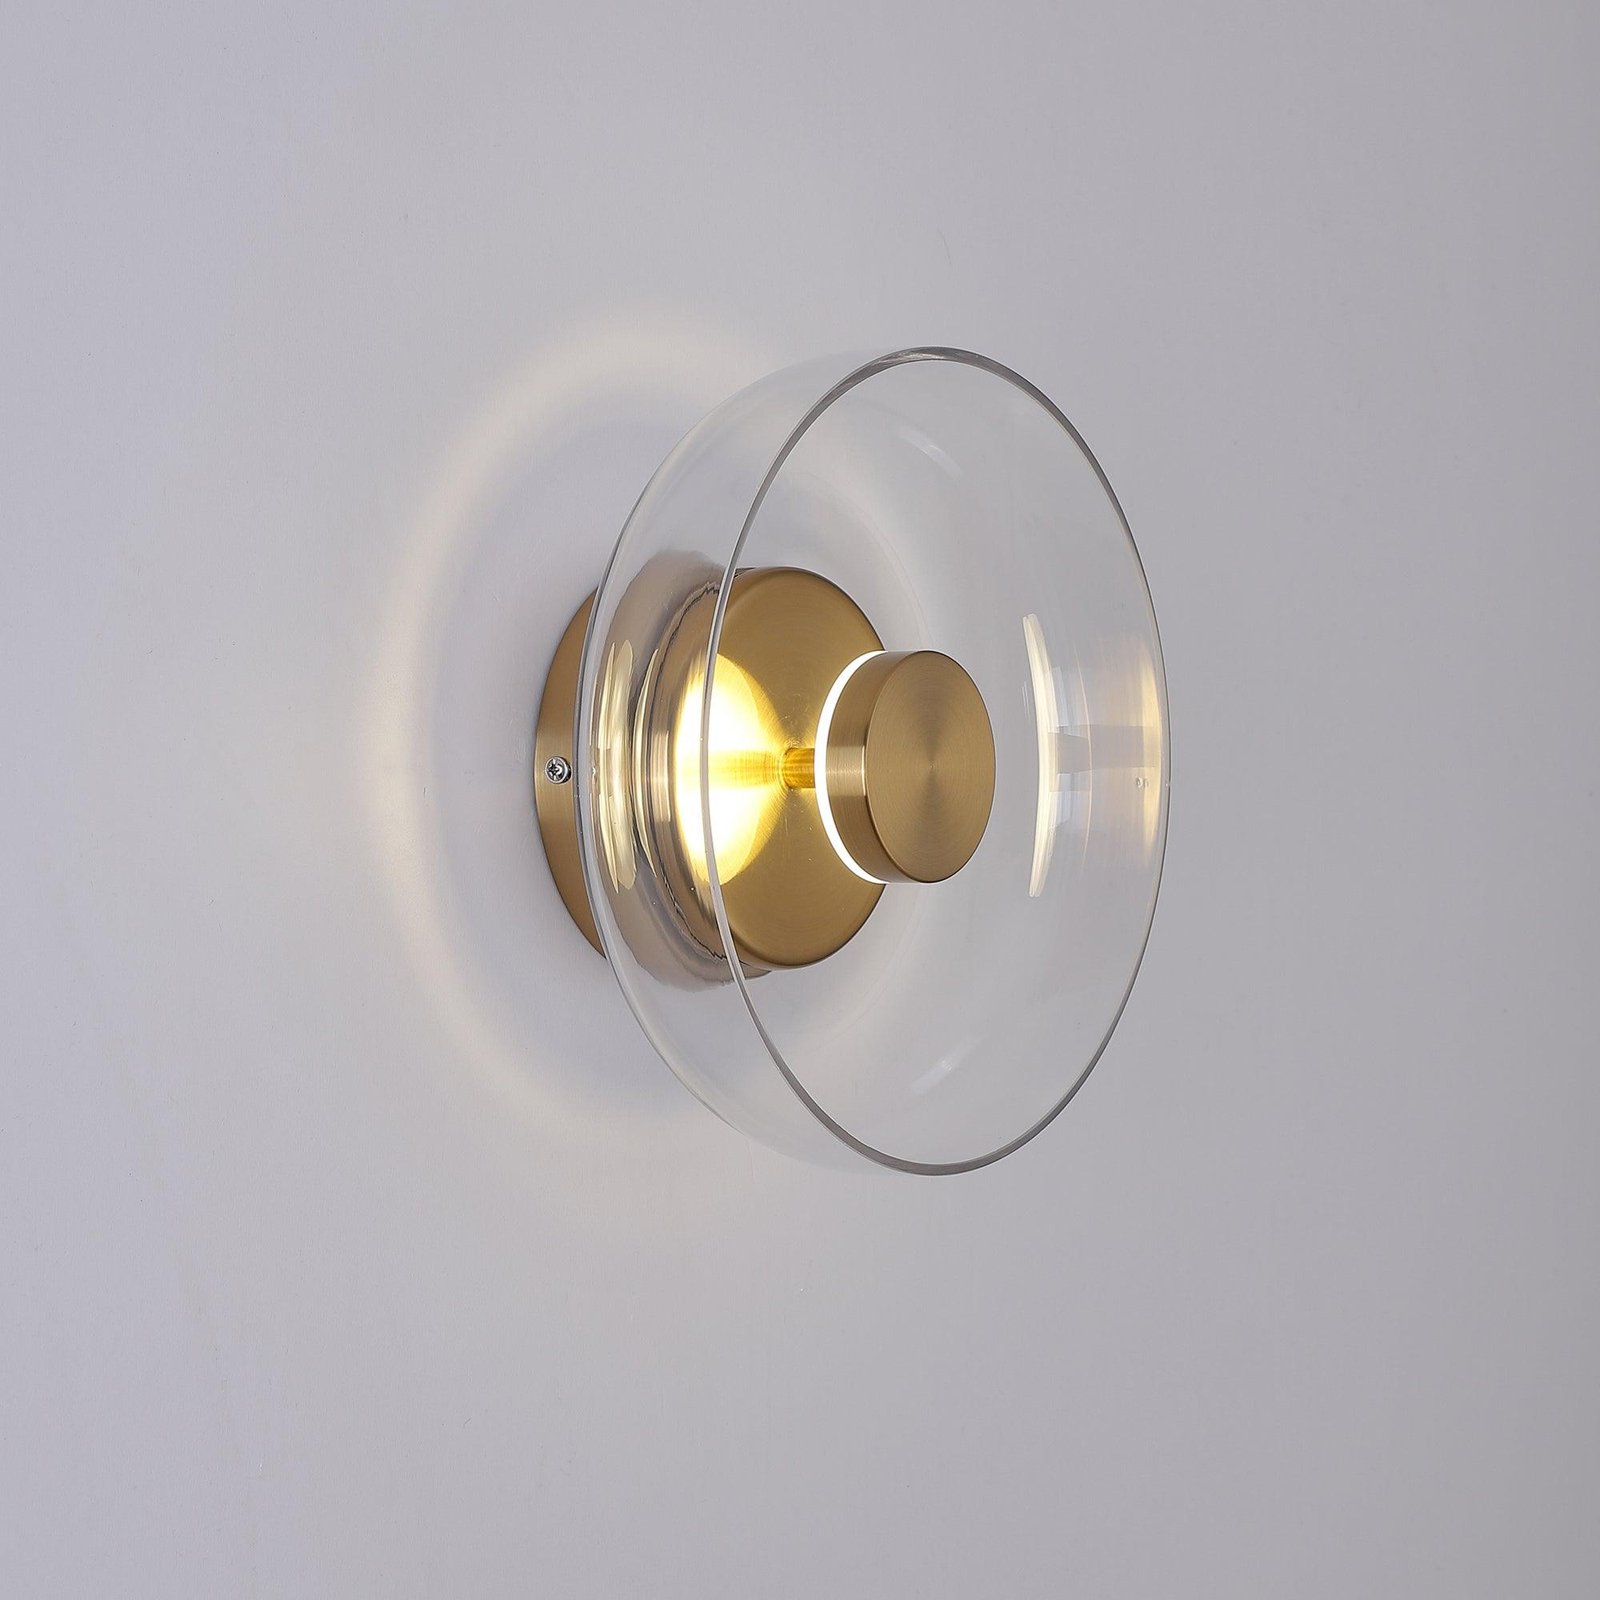 Blossi Wall Light with a Diameter of 3.9 Inches and Height of 9 Inches, or 10cm x 23cm, emits a Cool White Light and features a Brass Finish with Clear Glass